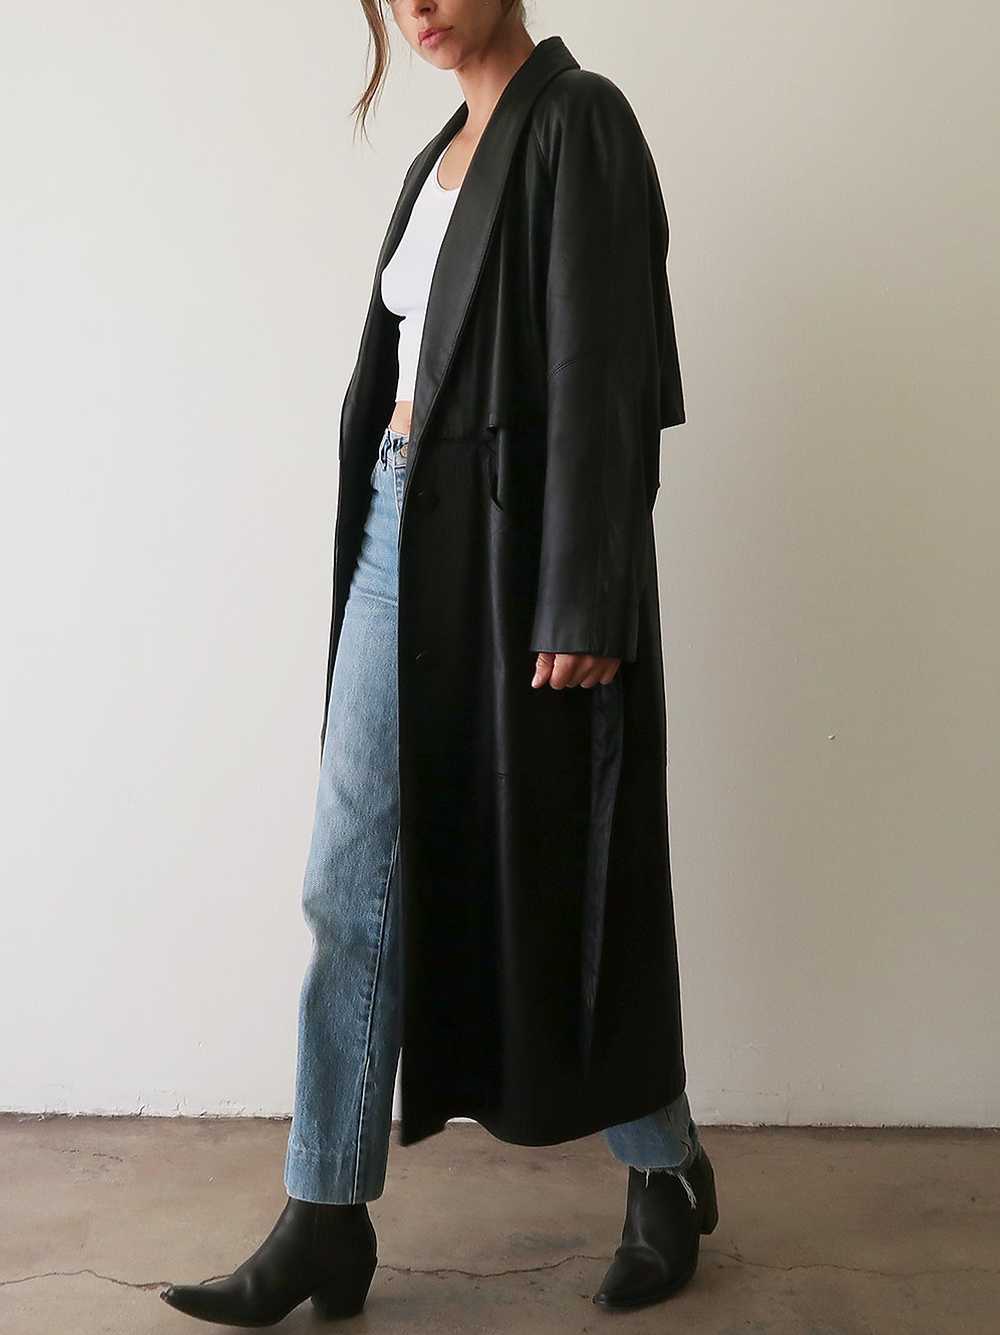 Black Leather Duster - image 3